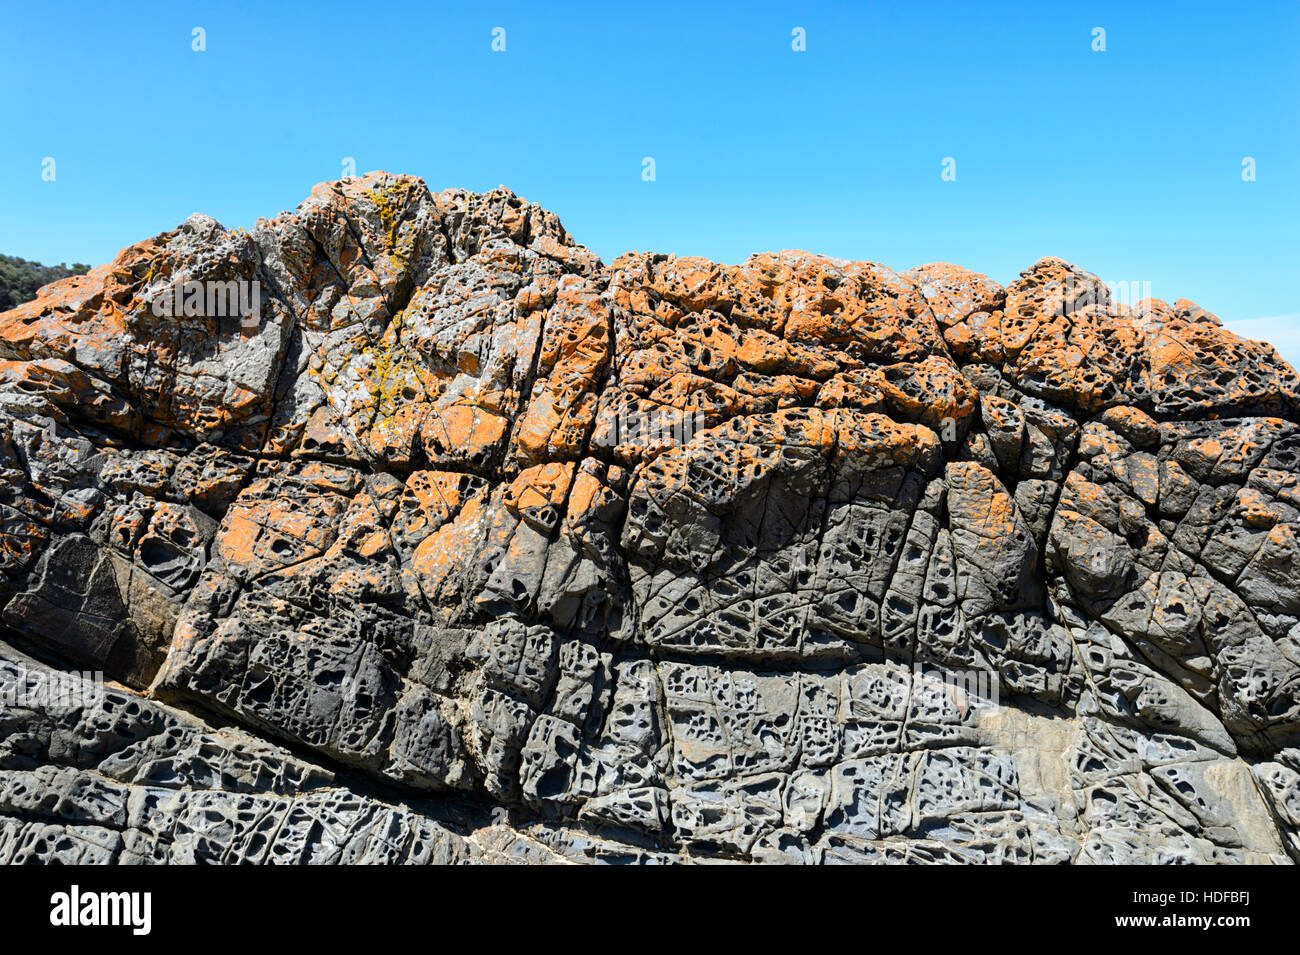 Rock outcrop showing honeycombing and irregular weathering due to wetting and drying and salt spray, Quarry Beach, Mallacoota, Victoria, VIC,Australia Stock Photo